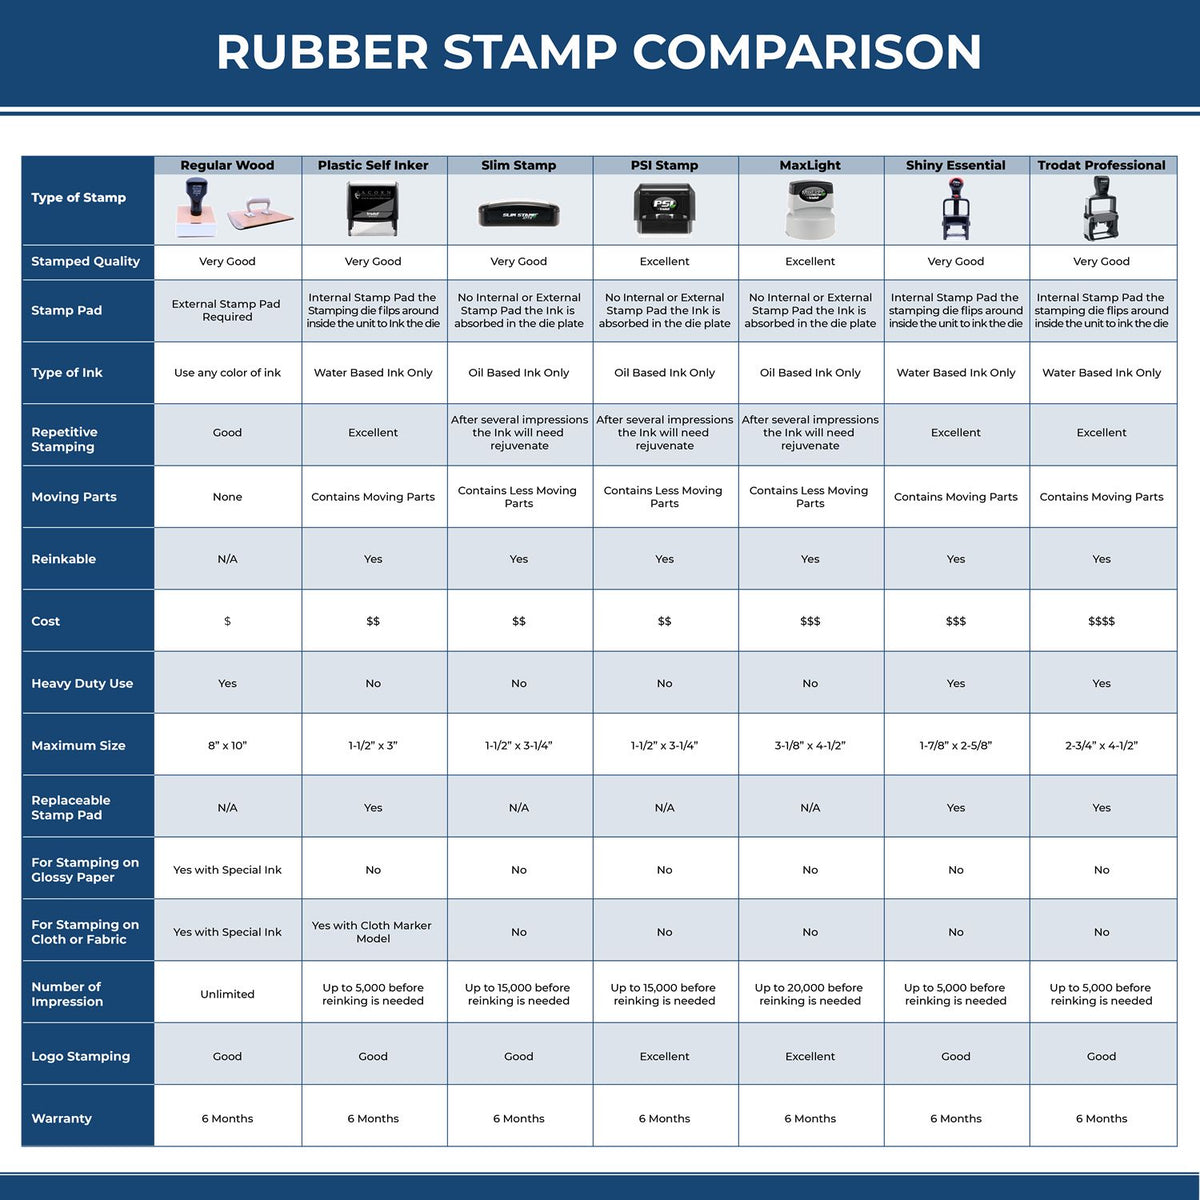 A comparison chart for the different types of mount models available for the Premium MaxLight Pre-Inked Virginia Engineering Stamp.